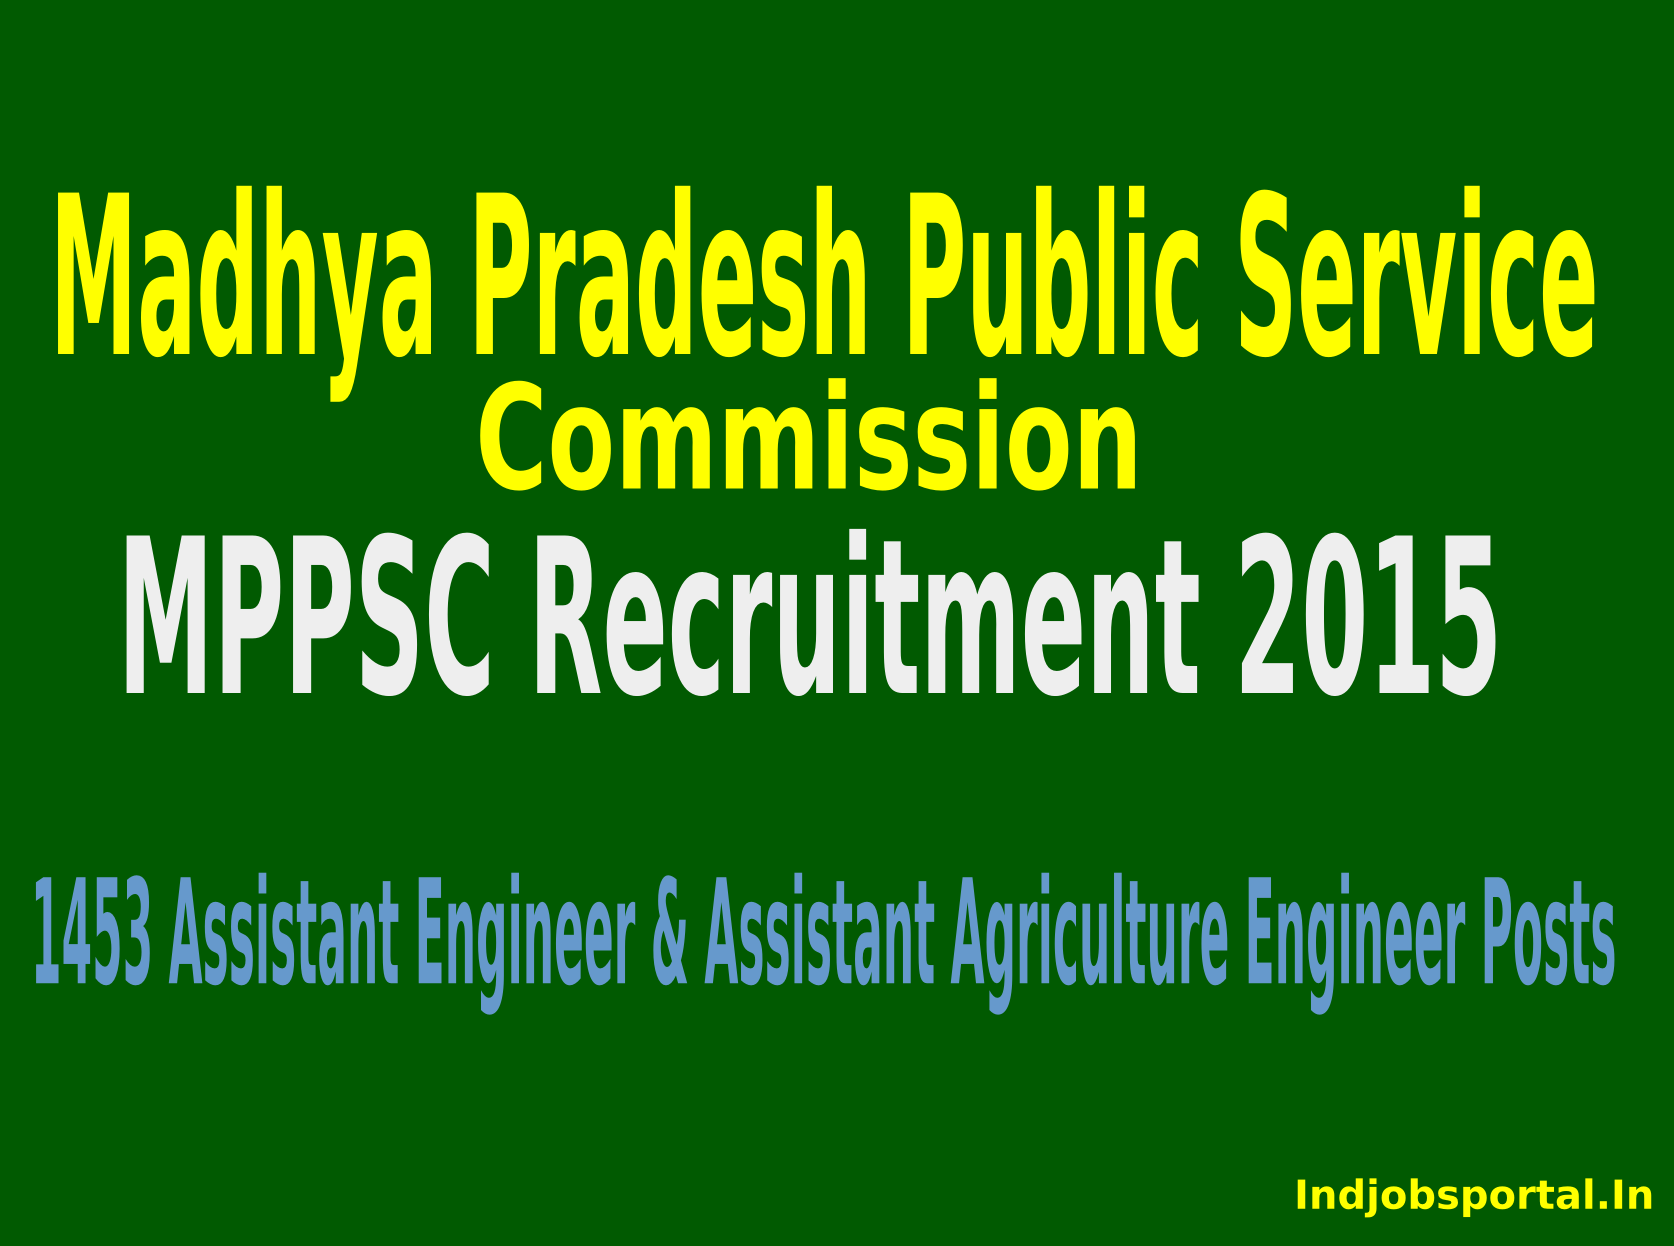 MPPSC Recruitment 2015 For 1453 Assistant Engineer & Assistant Agriculture Engineer Posts